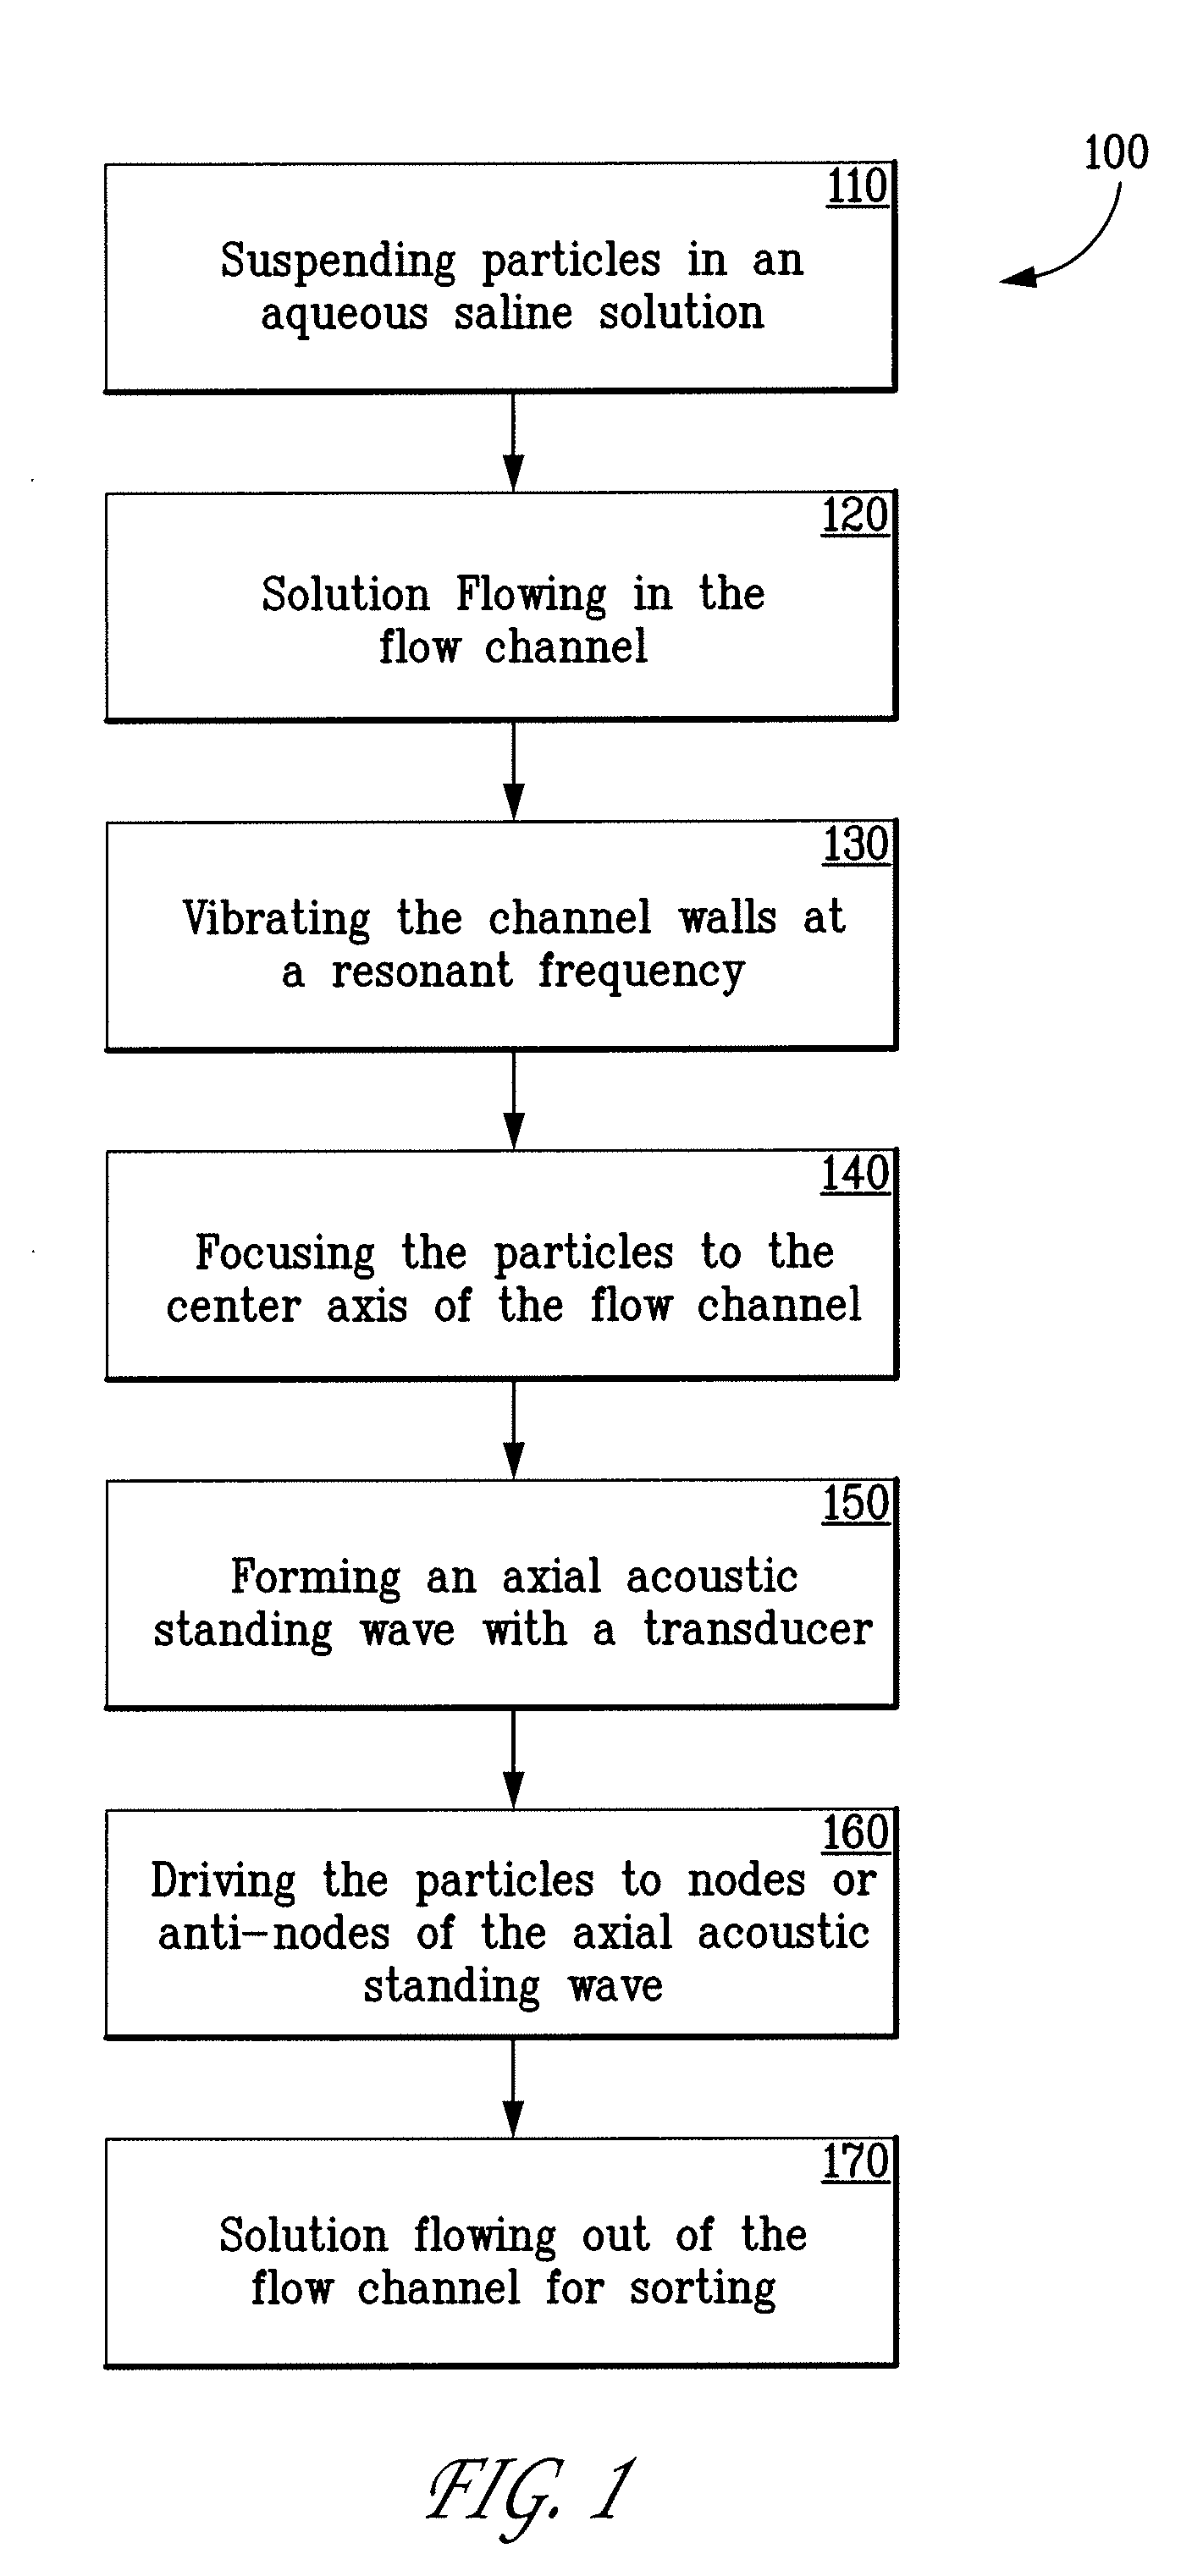 Method for non-contact particle manipulation and control of particle spacing along an axis